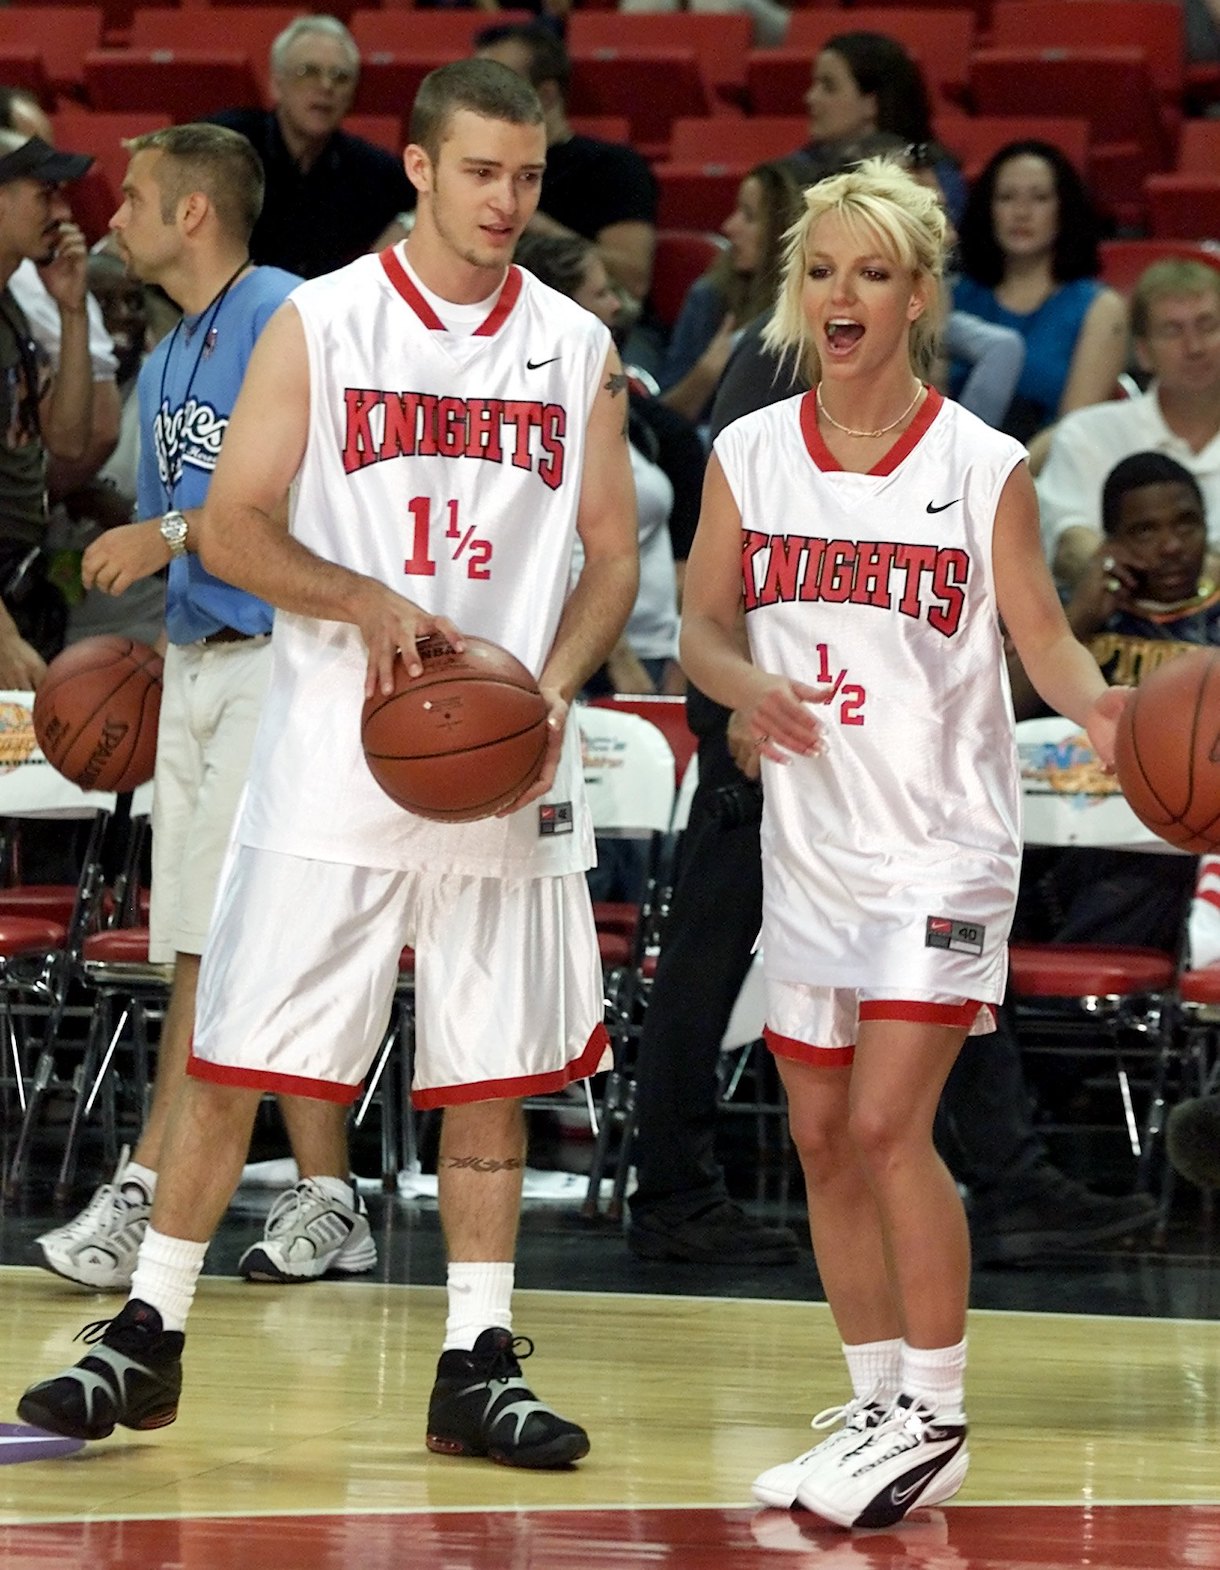 Justin Timberlake (L) of 'N Sync, and his girlfriend, singer Britney Spears warm up prior to the celebrity basketball game